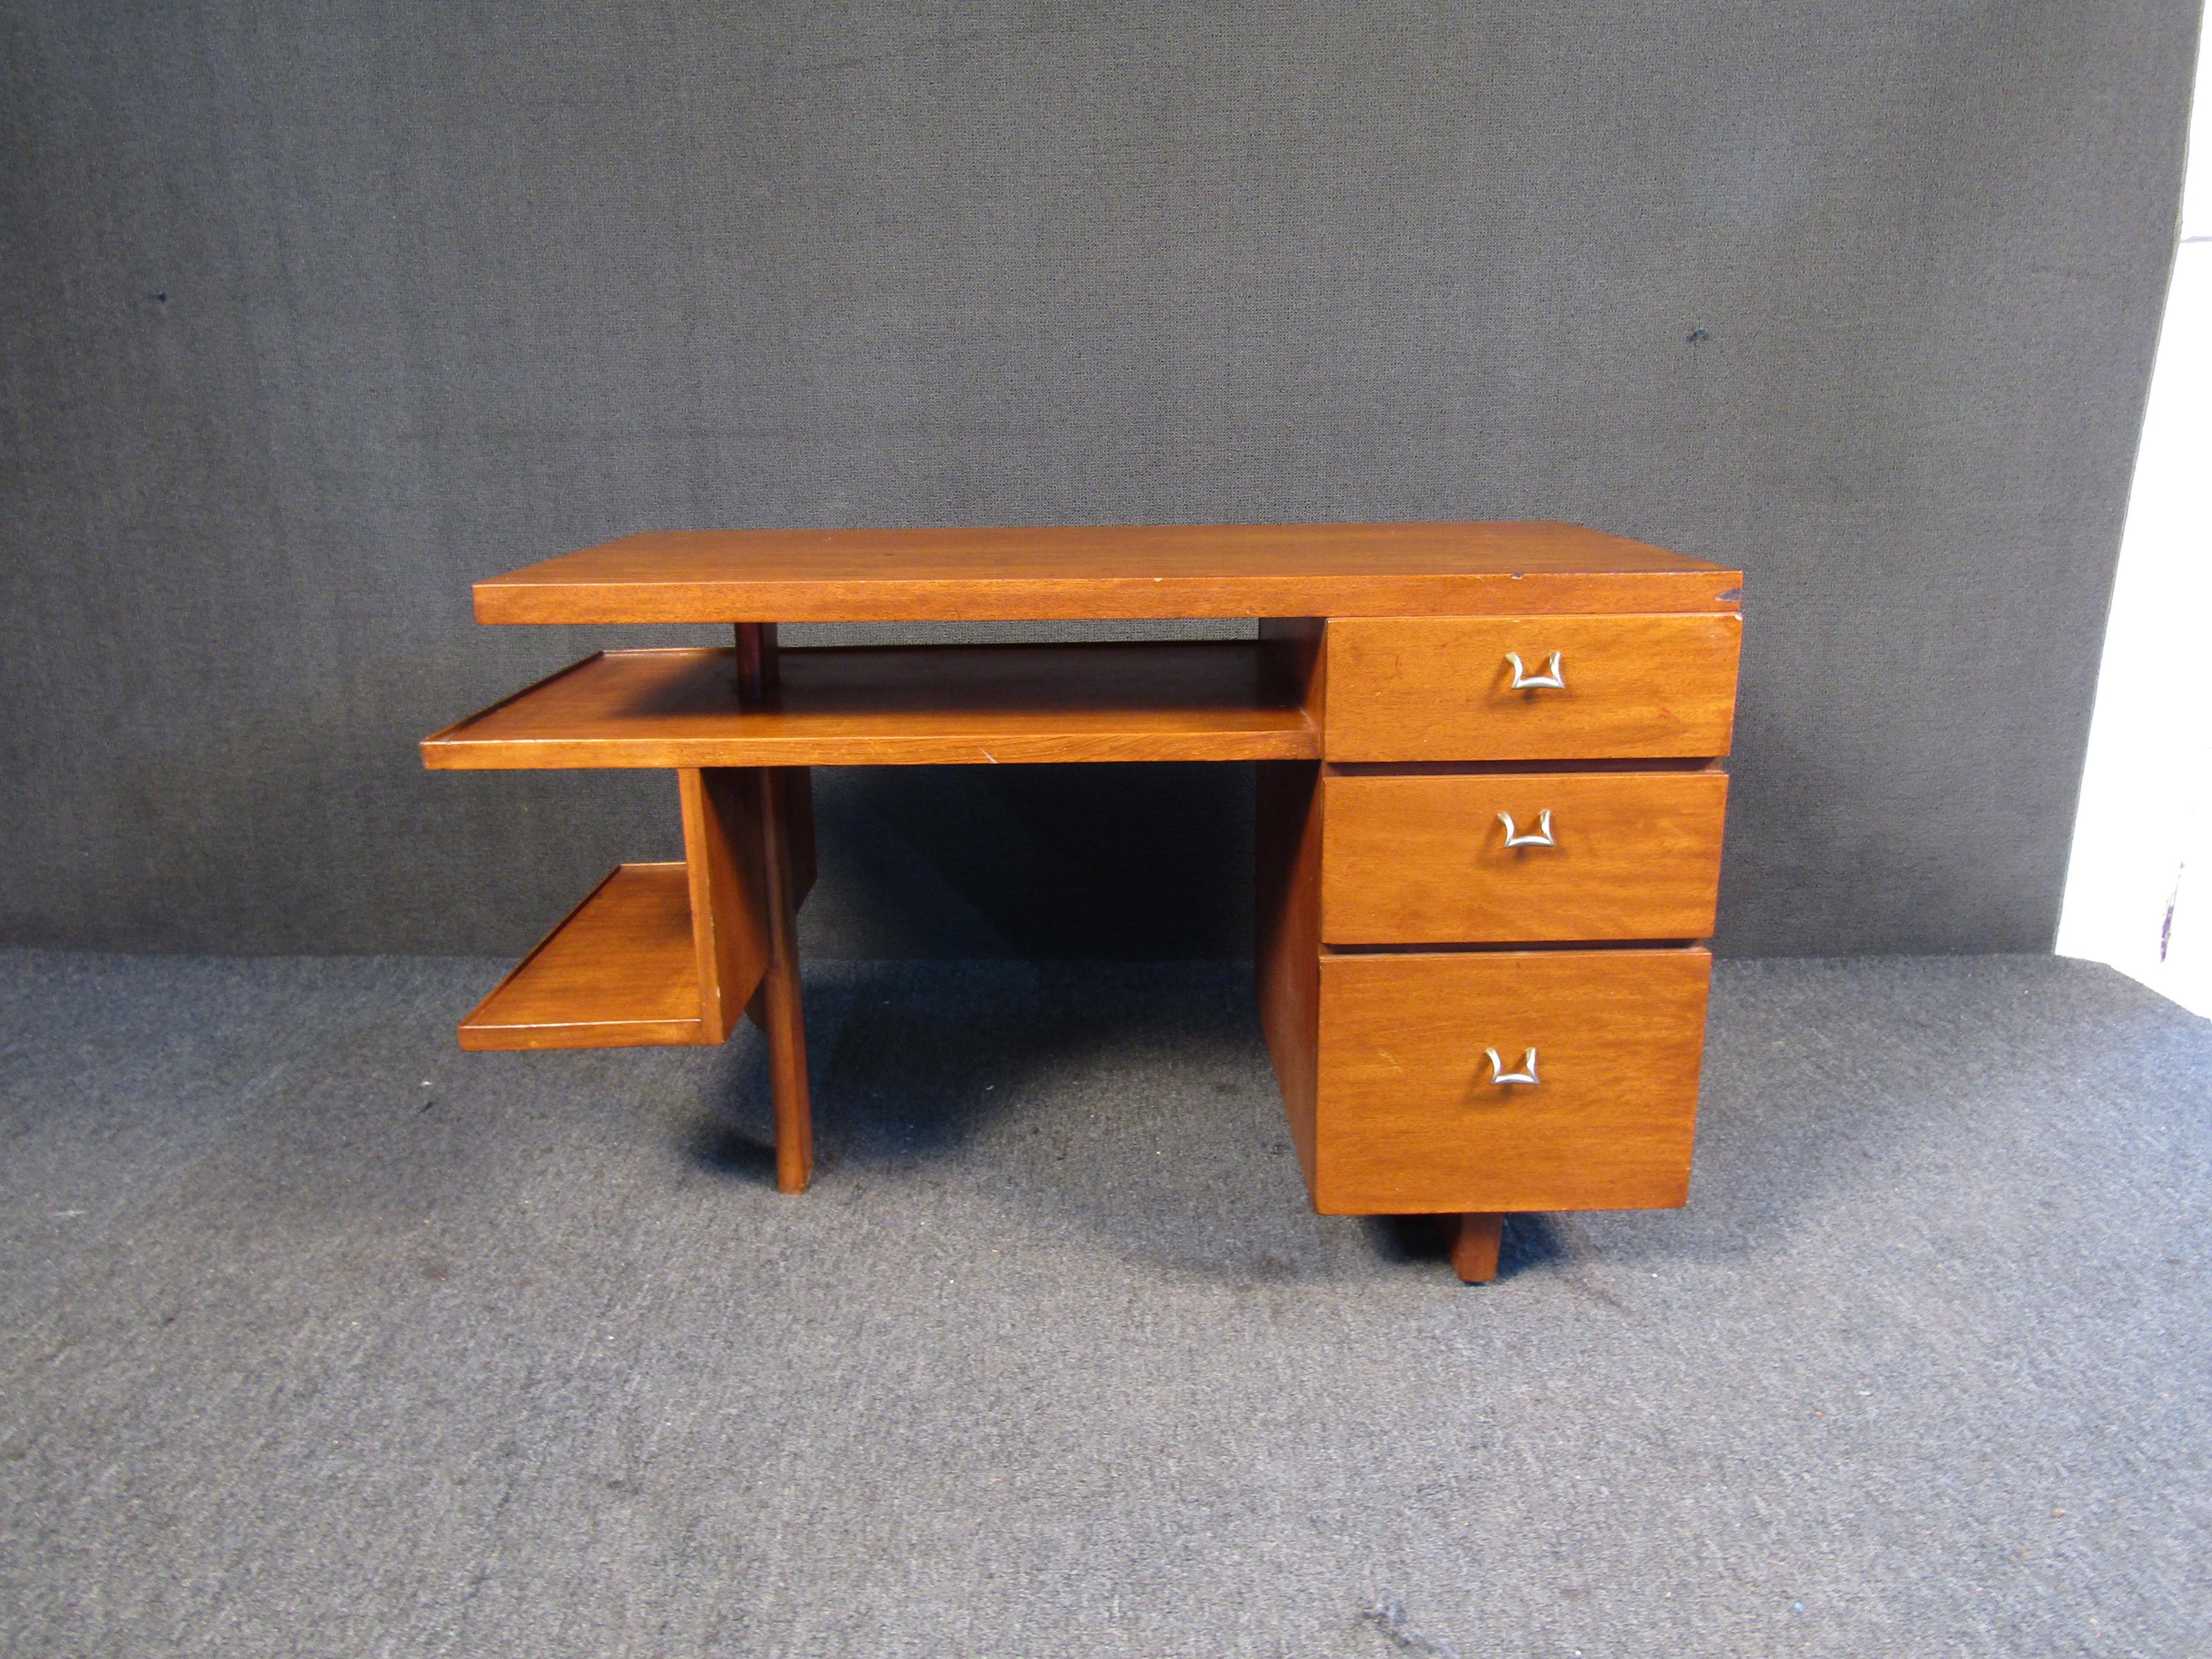 Vintage modern writing desk featured in rich walnut grain. This desk sits on sleek tapered legs and has three spacious drawers. This would be a perfect addition to any creative space.

Please confirm the item location (NY or NJ).